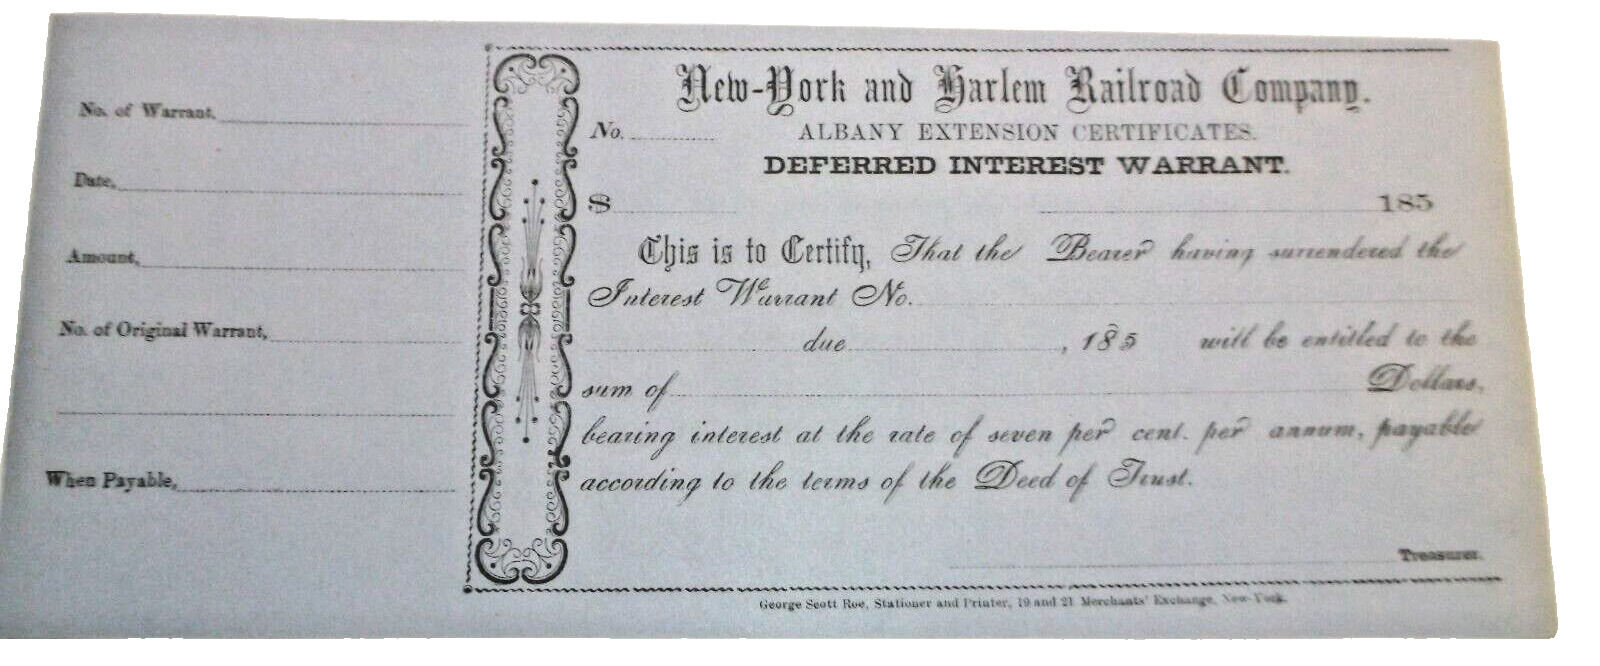 1850 NEW YORK AND HARLEM RAILROAD NYC ALBANY EXTENSION DEFERRED INTEREST WARRANT